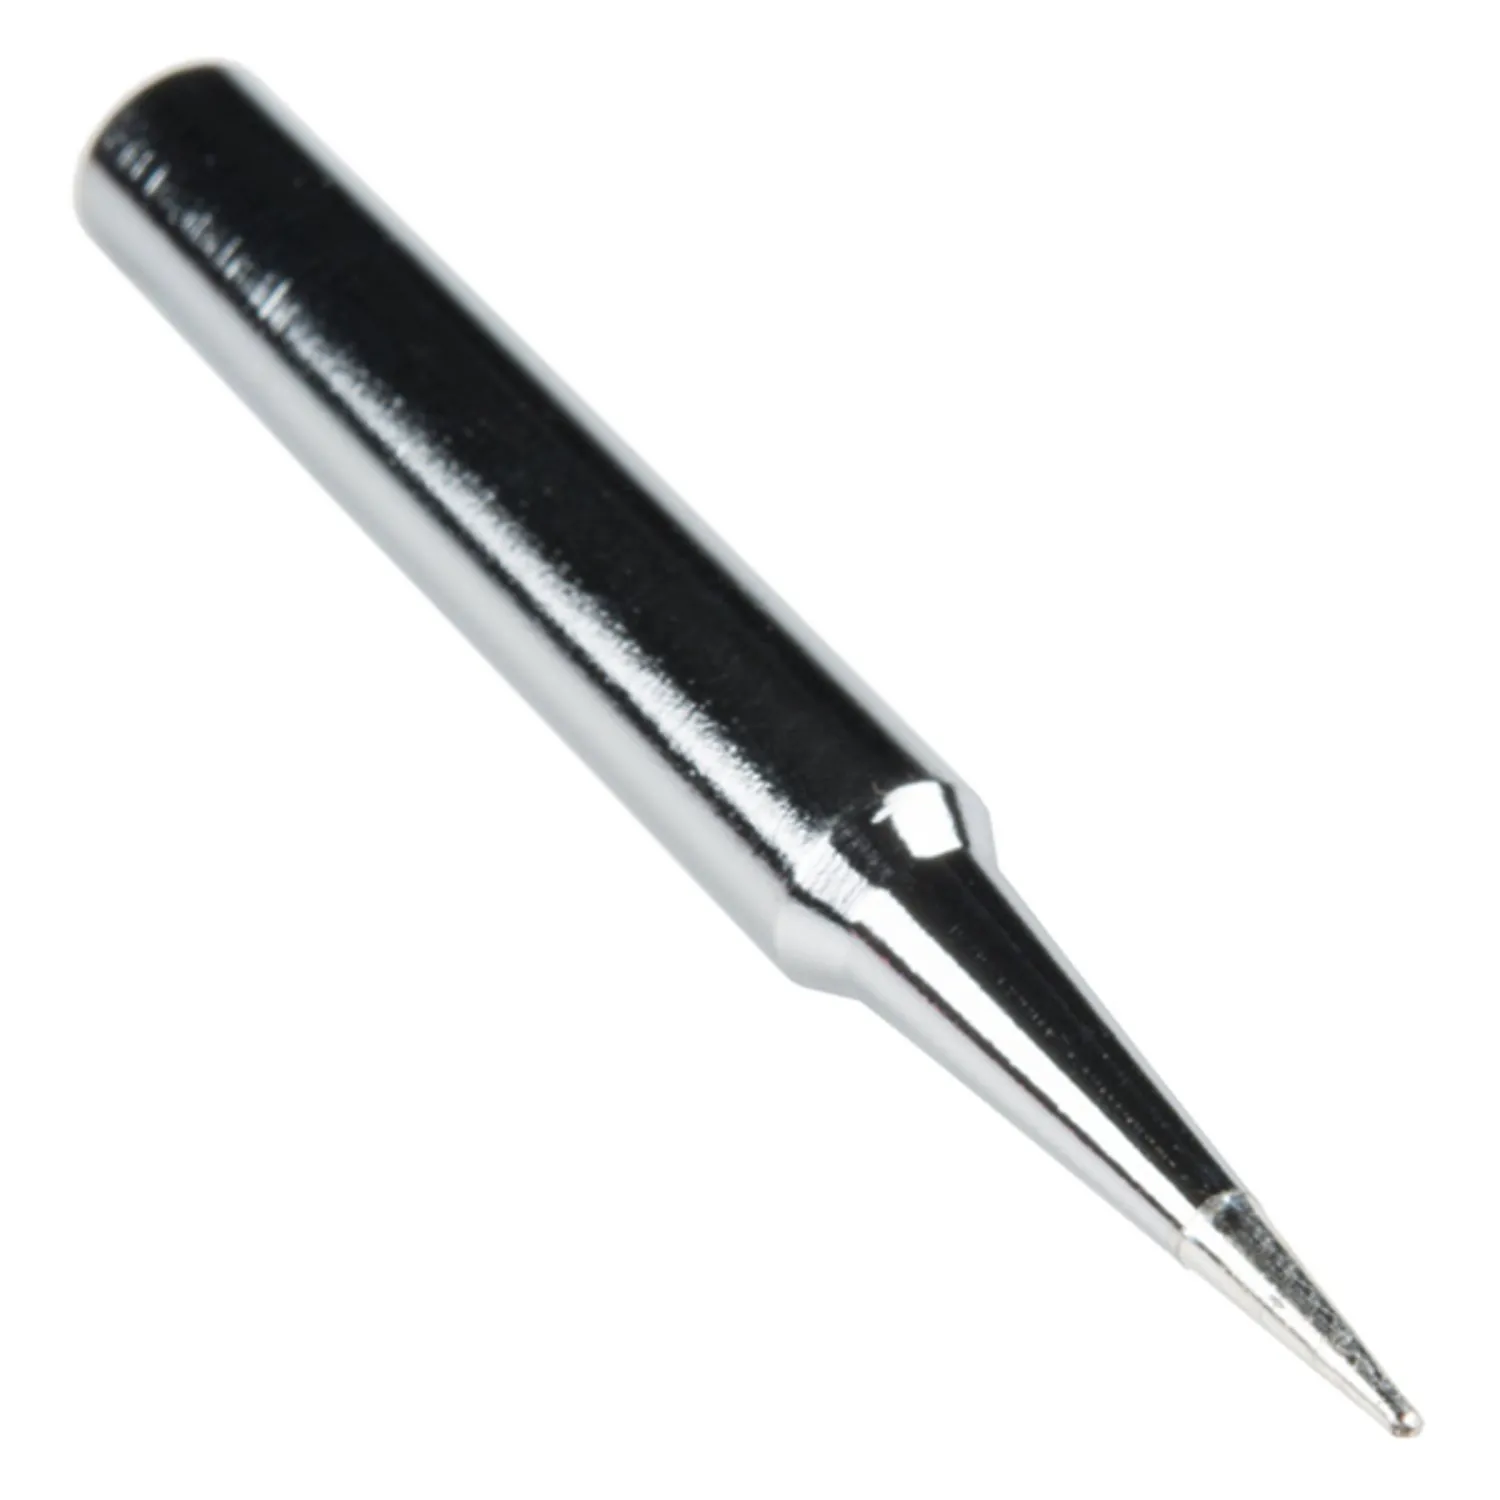 Photo of Soldering Tip - Weller - Conical (ST6)